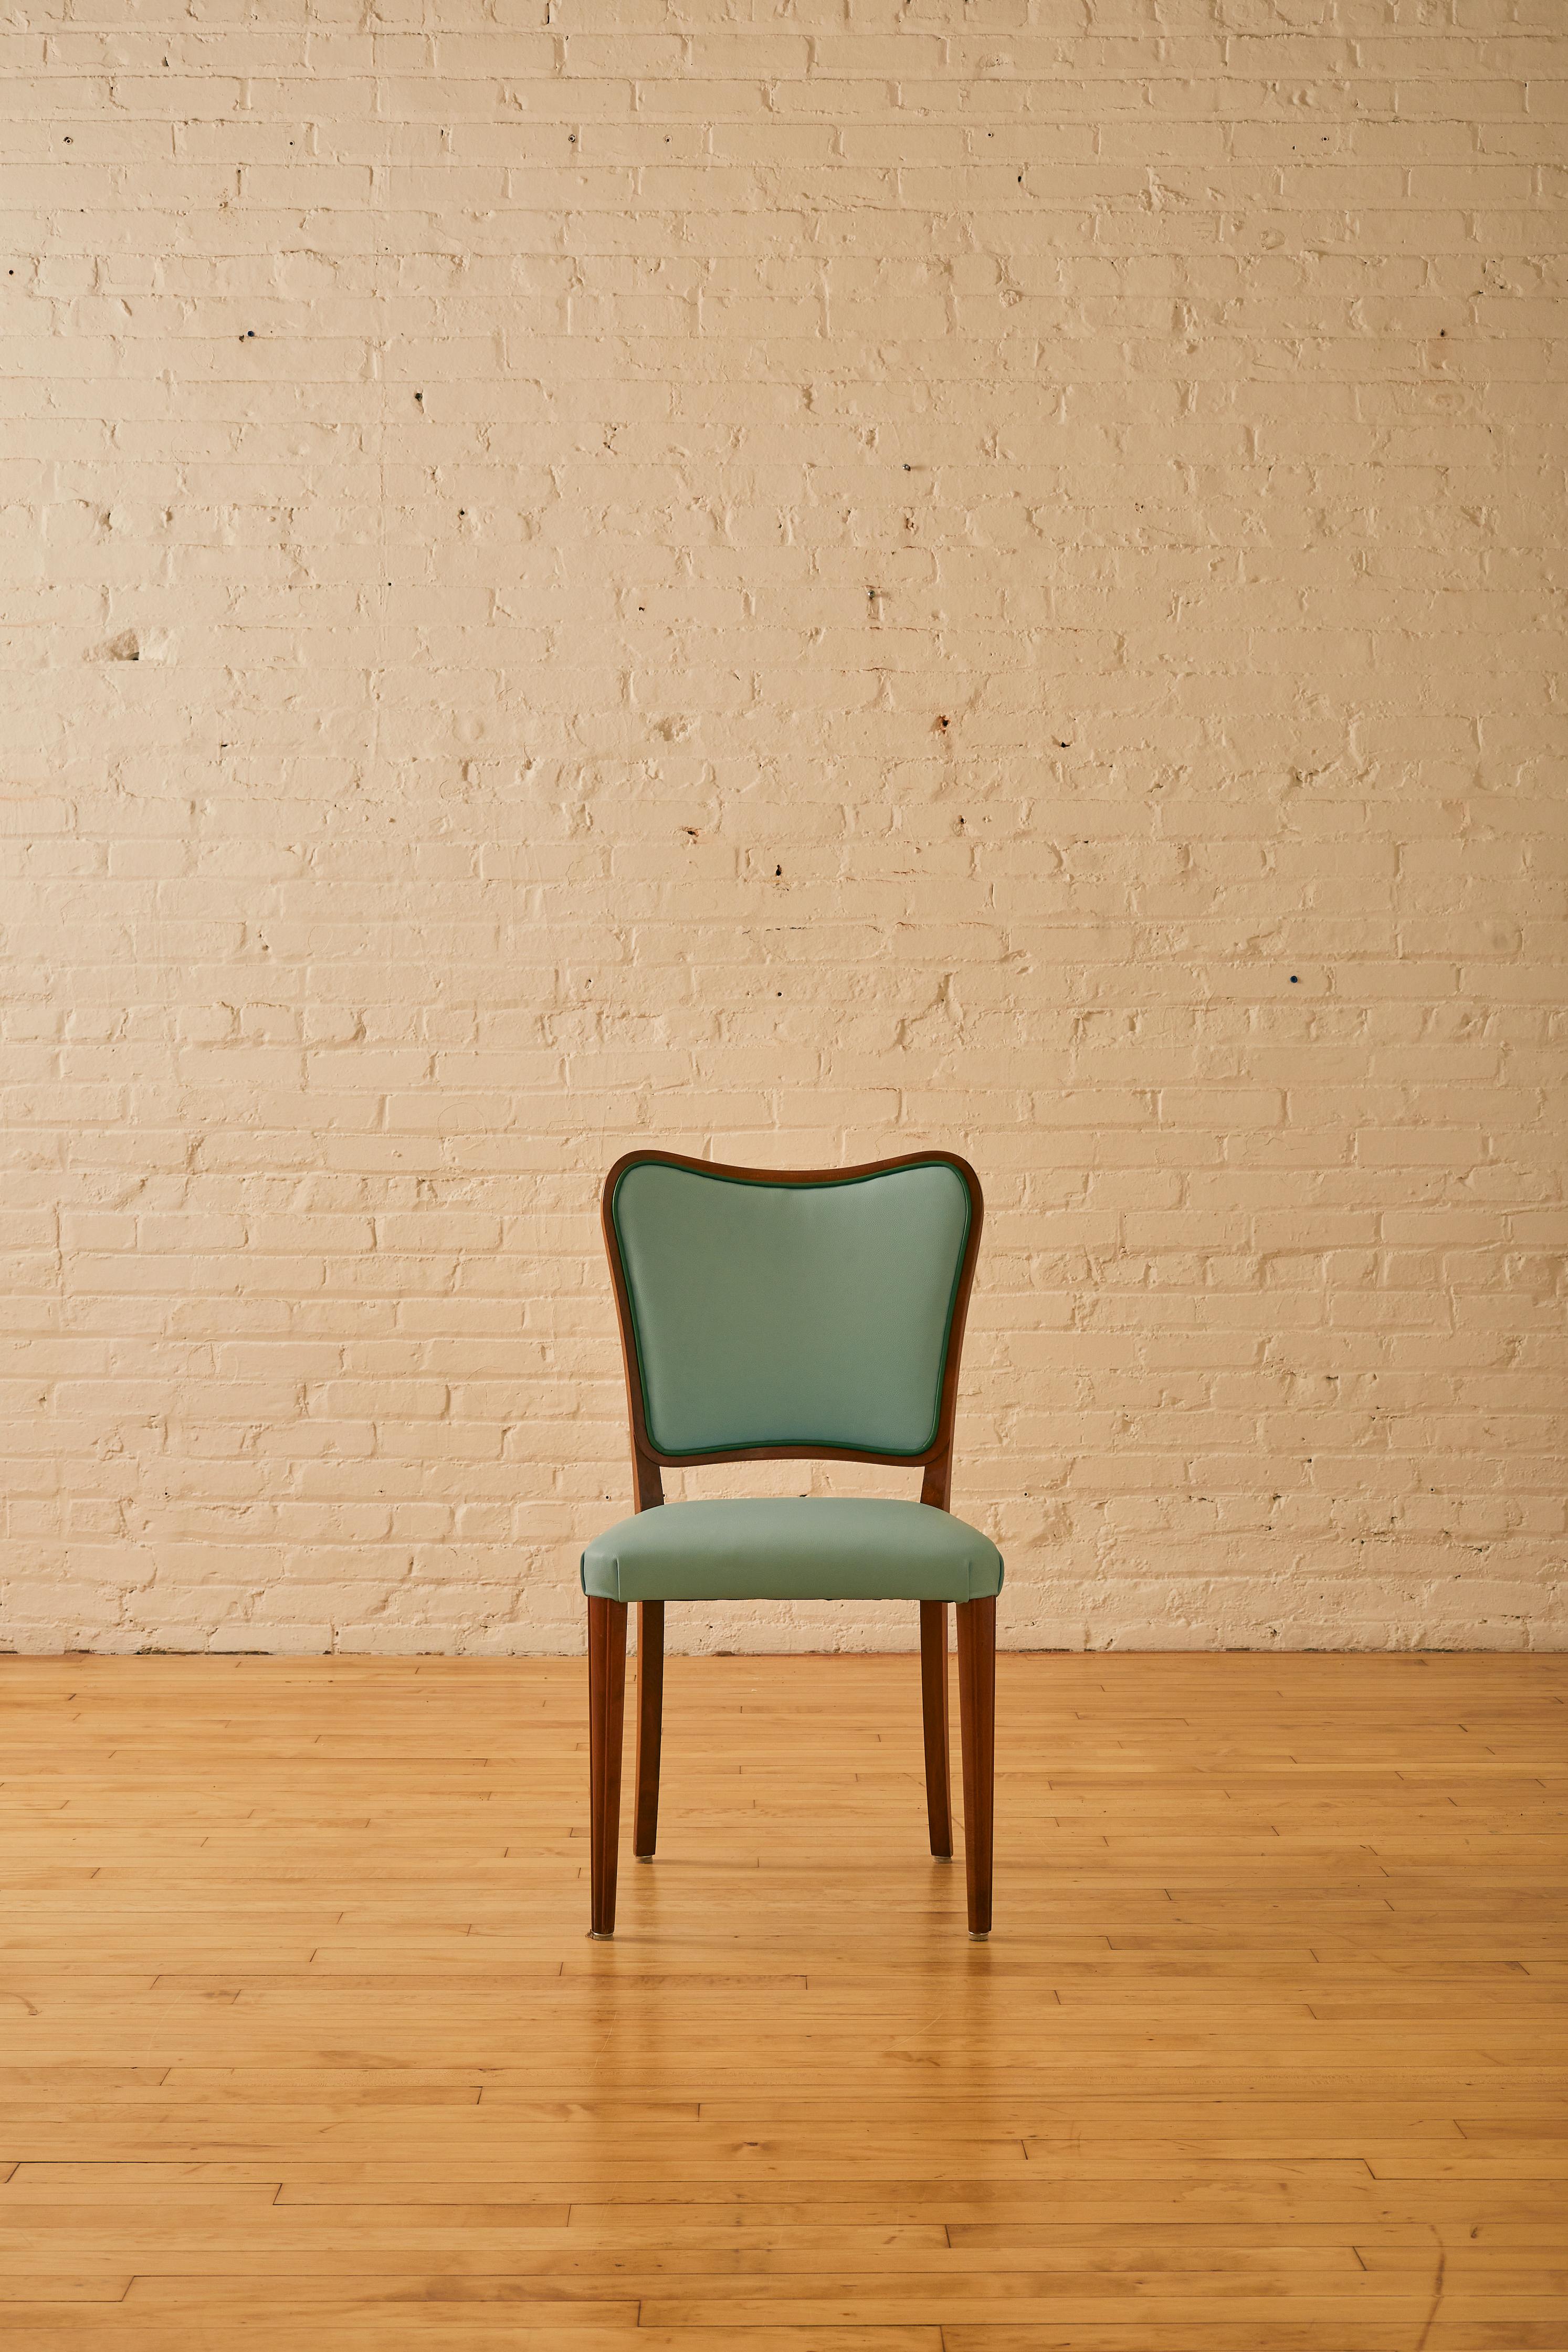 Set of 4 Danish Dining Chairs with teak wood. Newly reupholstered in Italian leather with green piping. 

